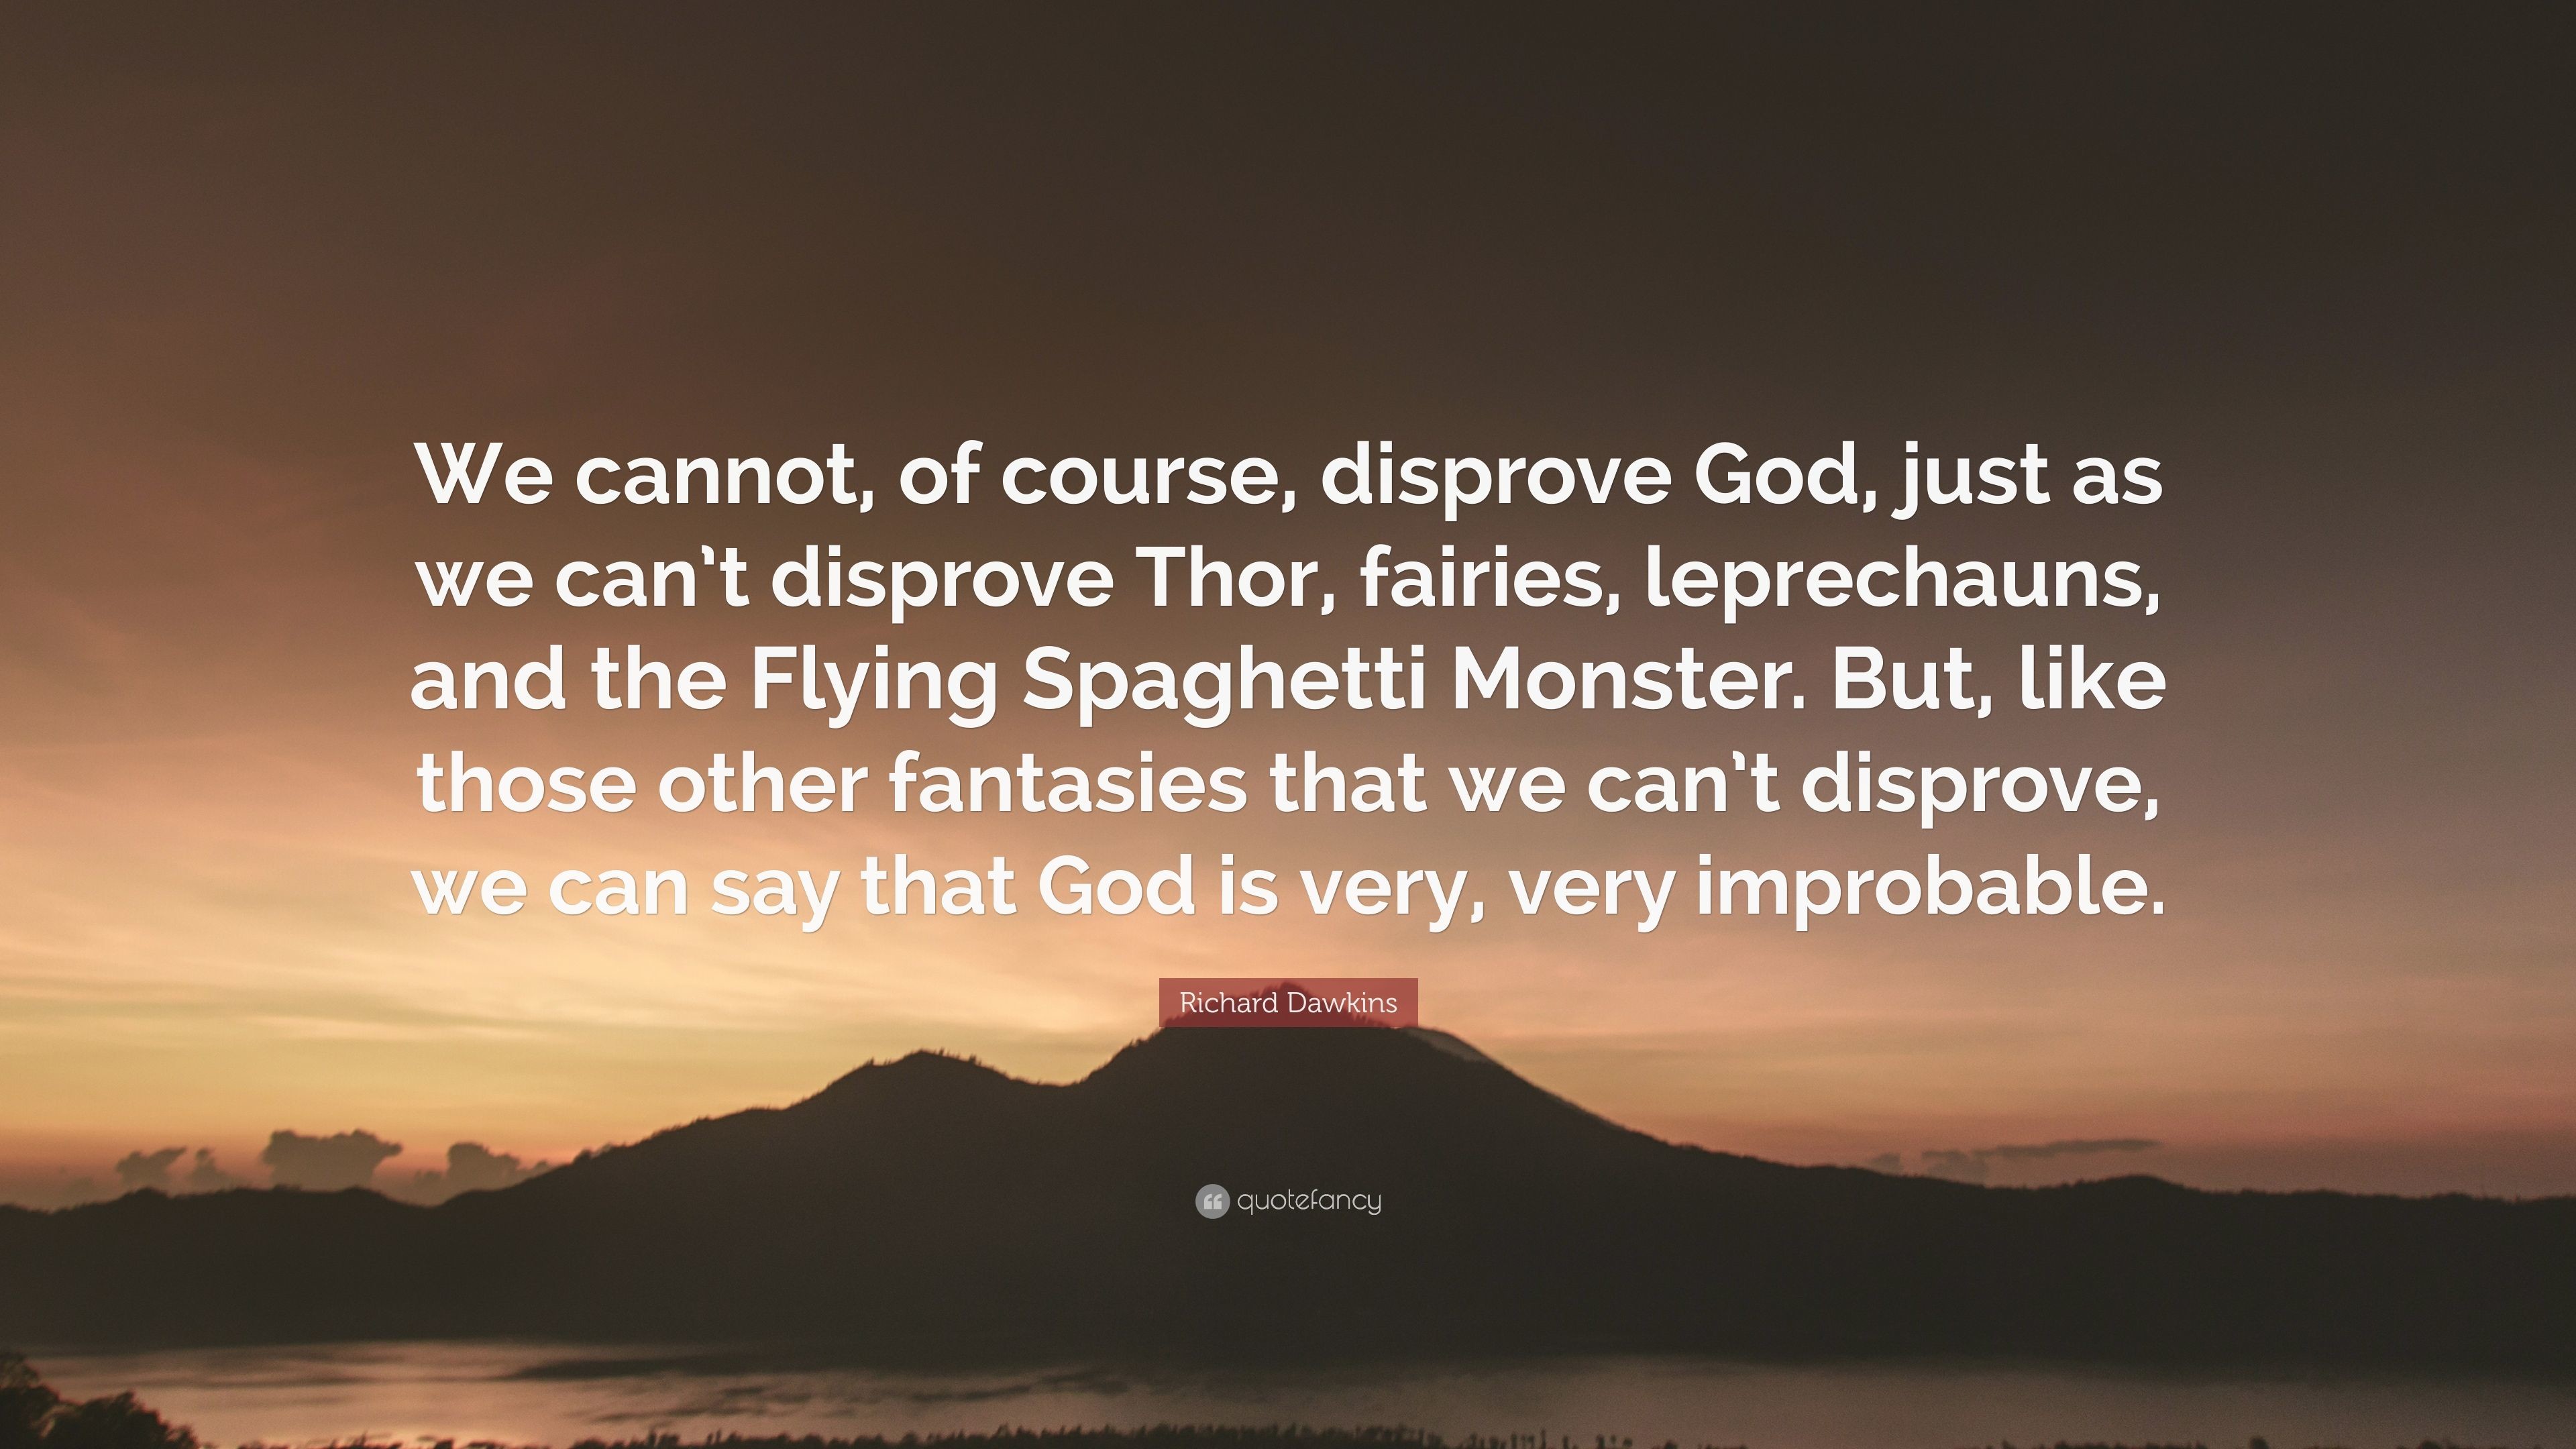 3840x2160 Richard Dawkins Quote: “We cannot, of course, disprove God, just as